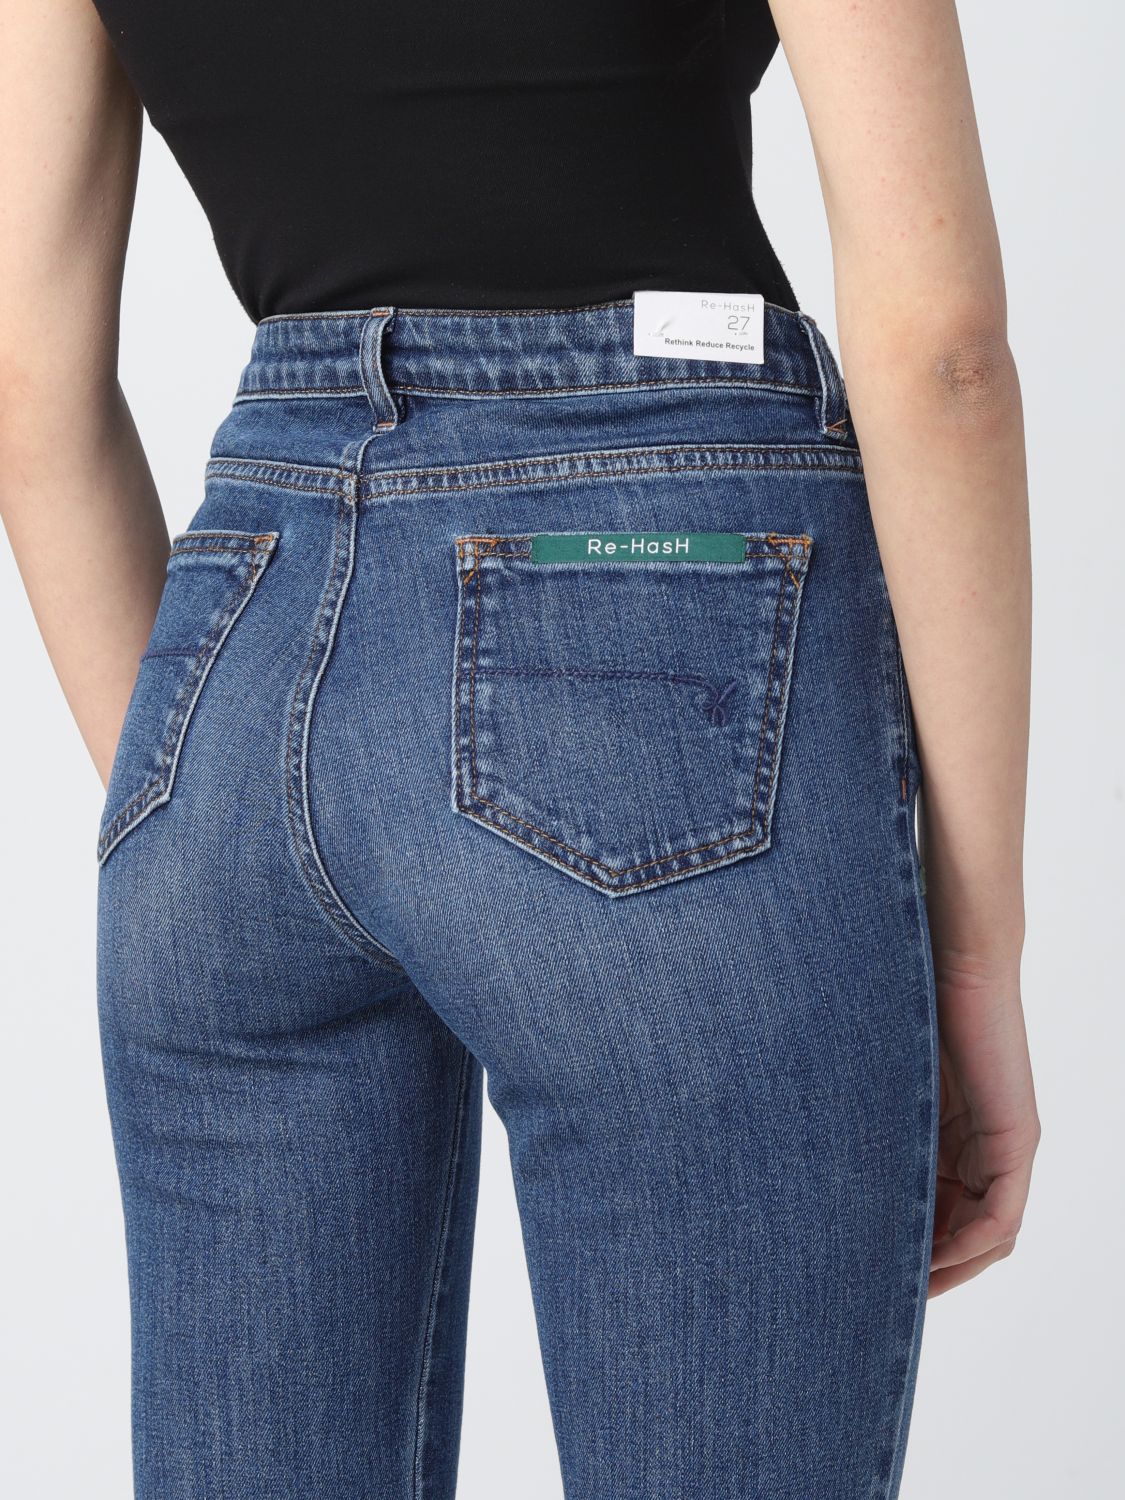 Jeans Re-Hash: Jeans cropped Re-hash in denim washed blue 3